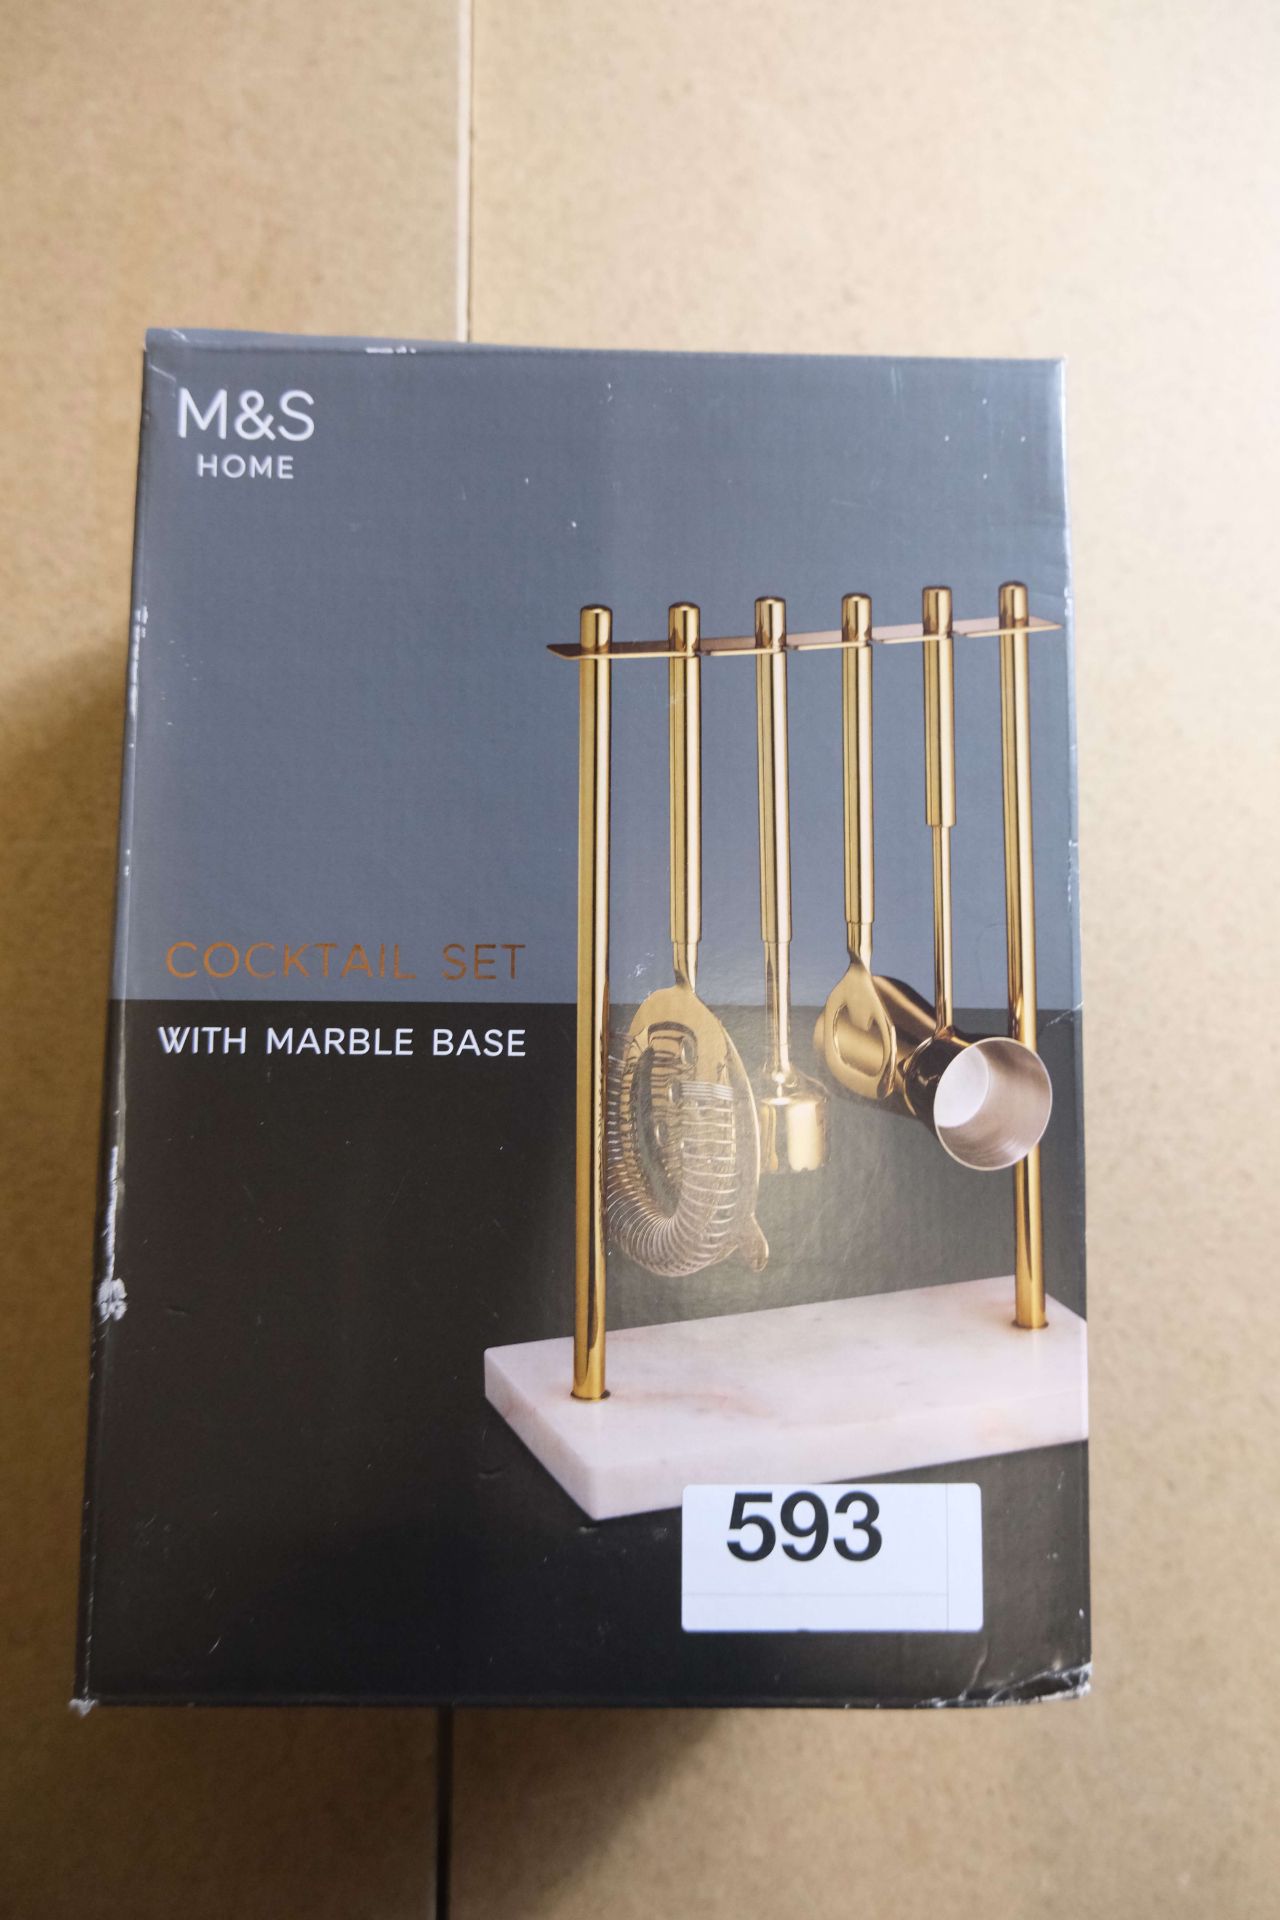 M&S Home Cocktail Set with Marble Base